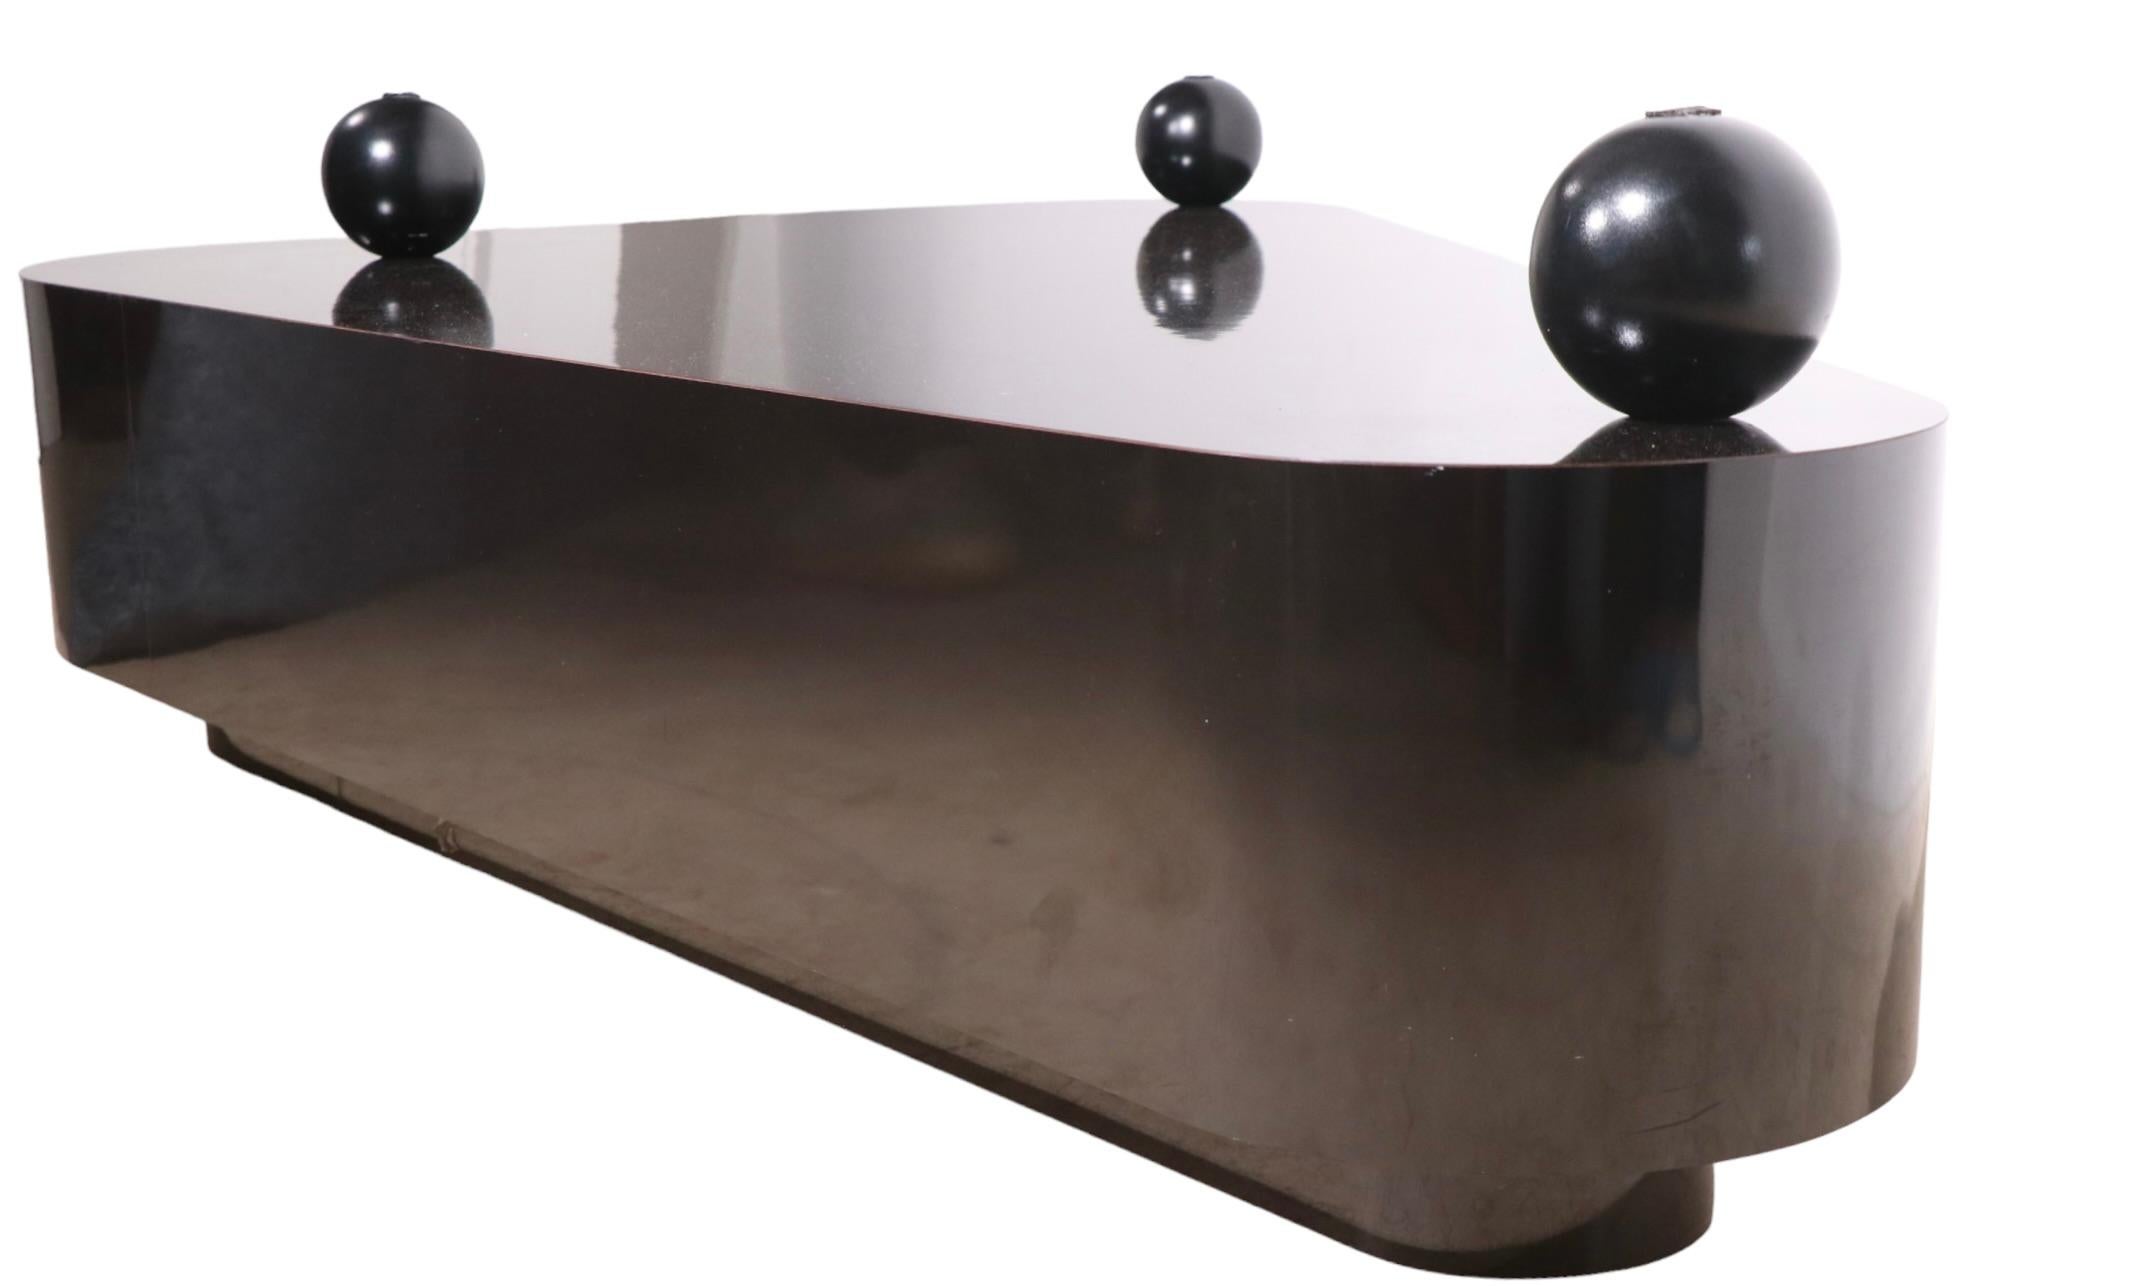 Spectacular two tier triangular coffee table, having a glossy black Formica base, with a thick ( 1 in. ) deeply textured plate glass top. The base features three balls, on which the glass top rests, and a hidden drawer. The glass top has a cool